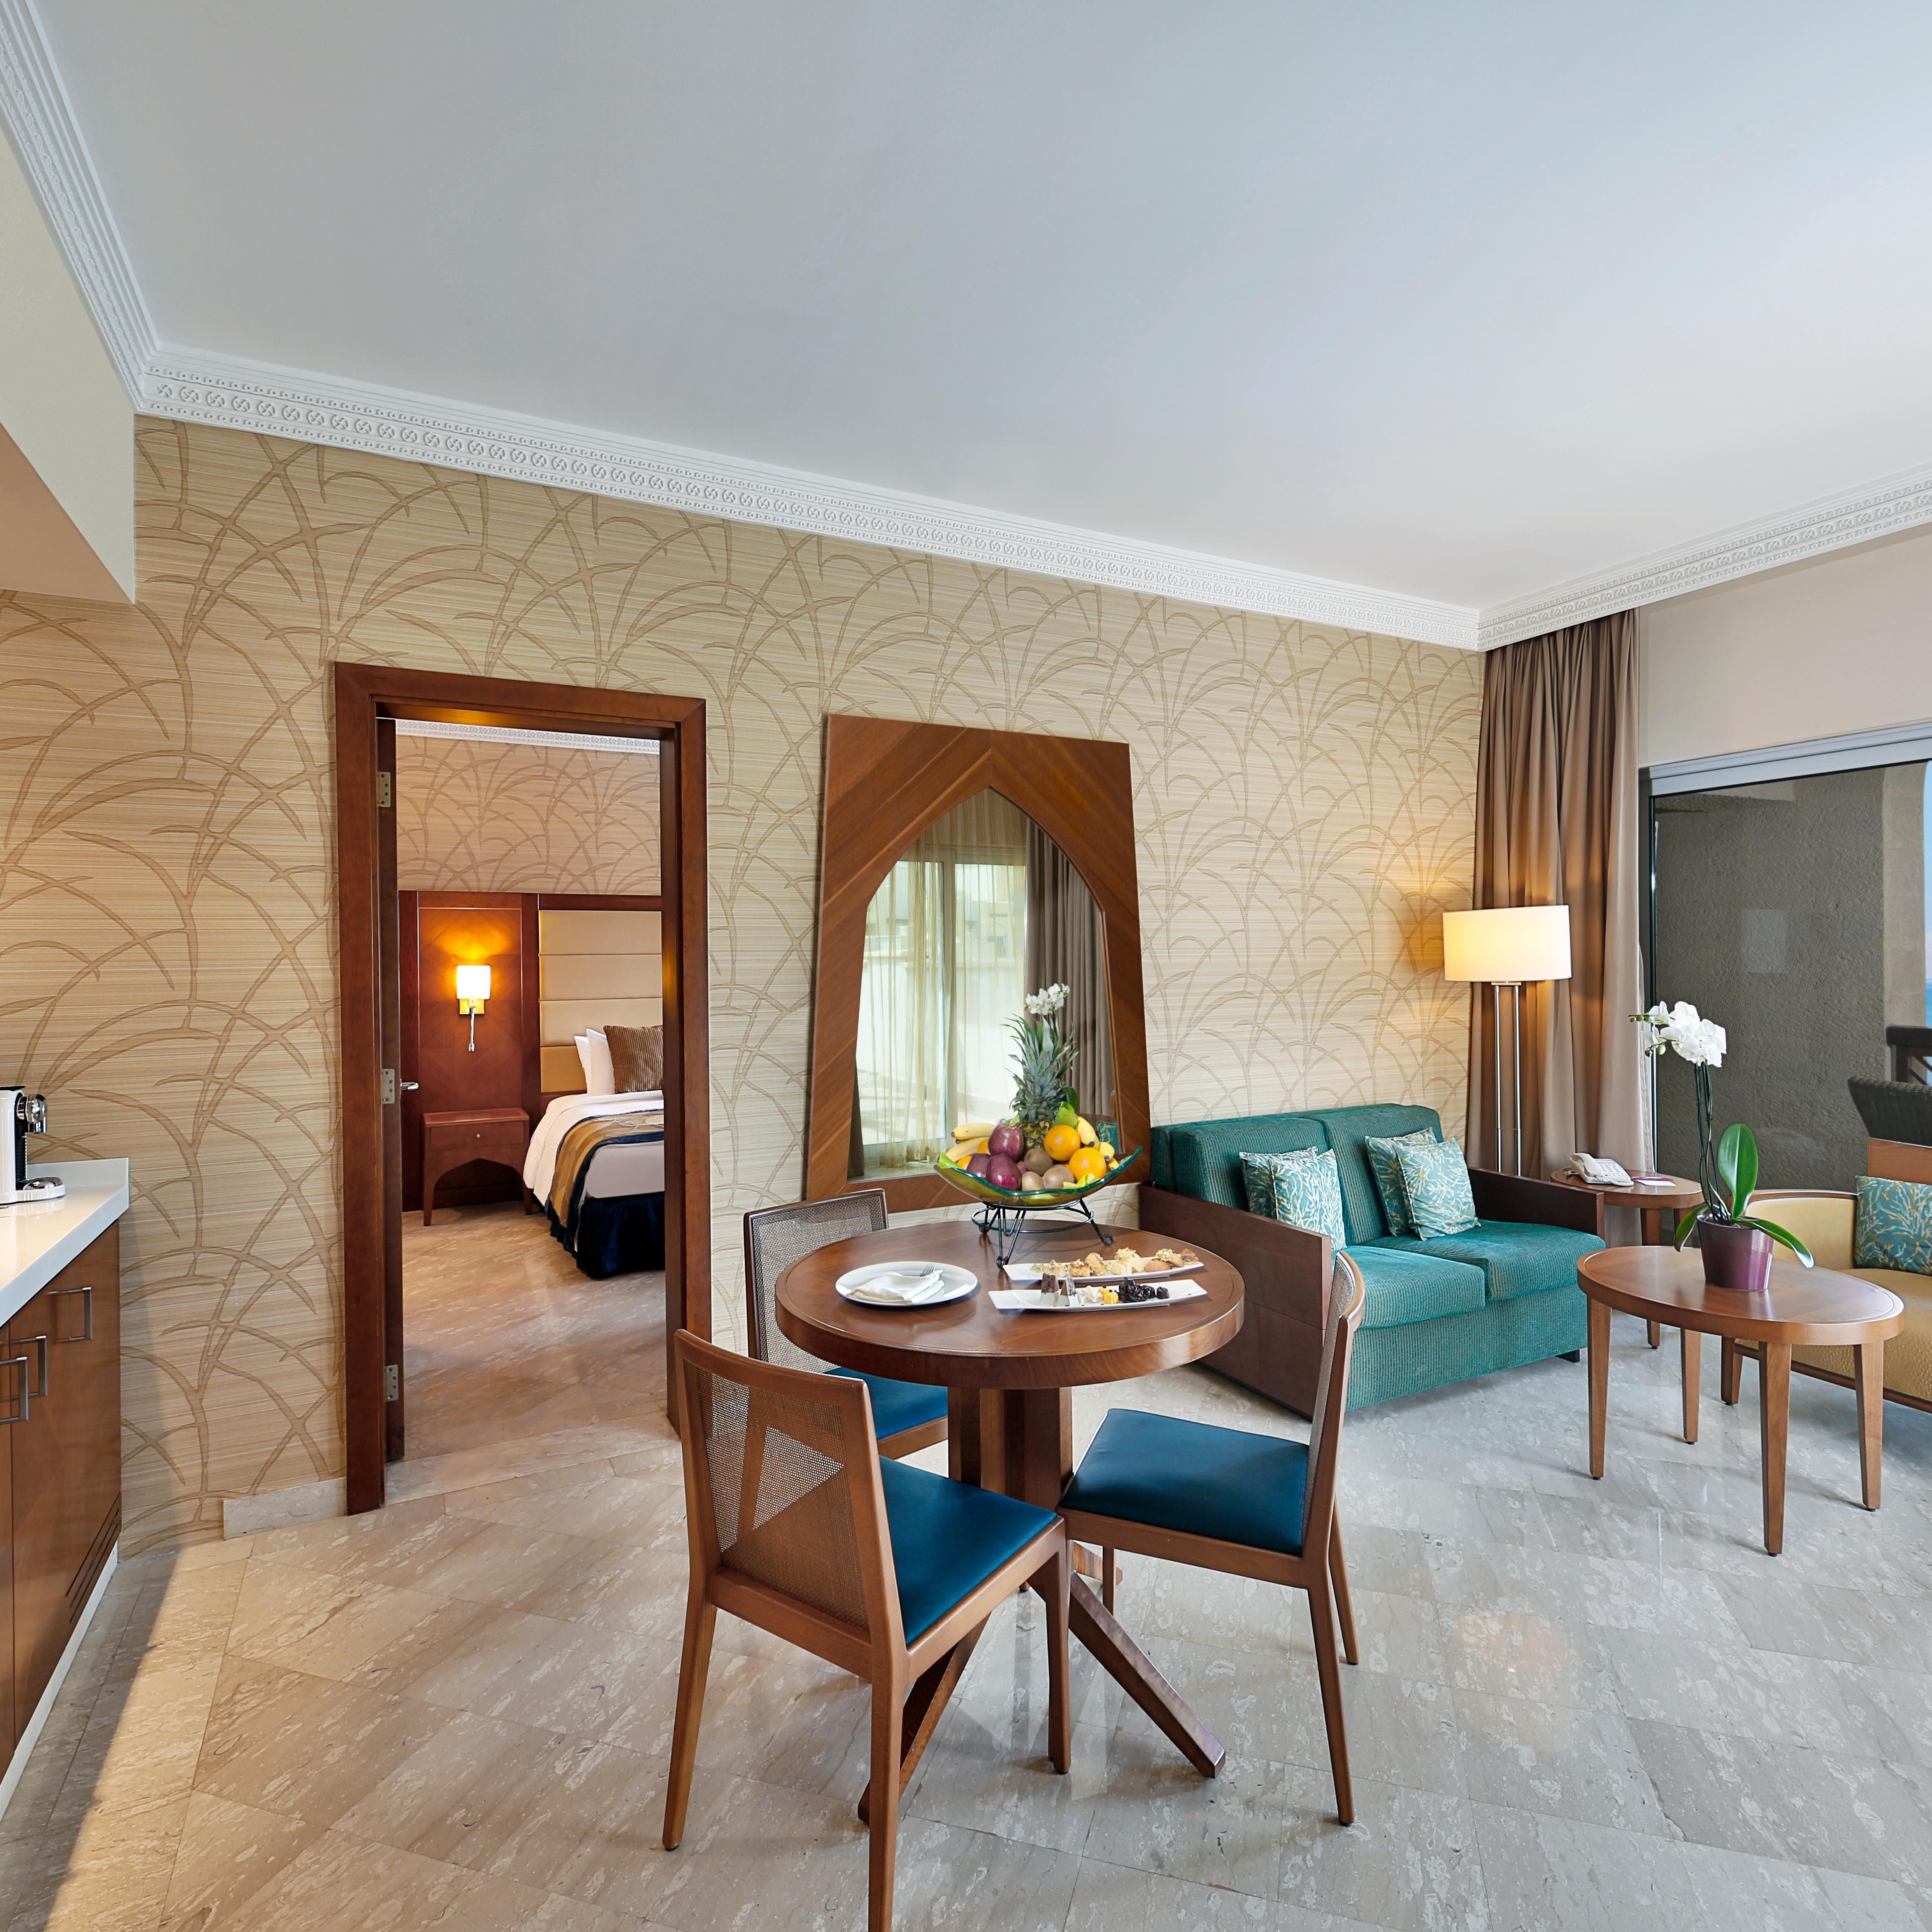 All our suites are created as modern sanctuaries